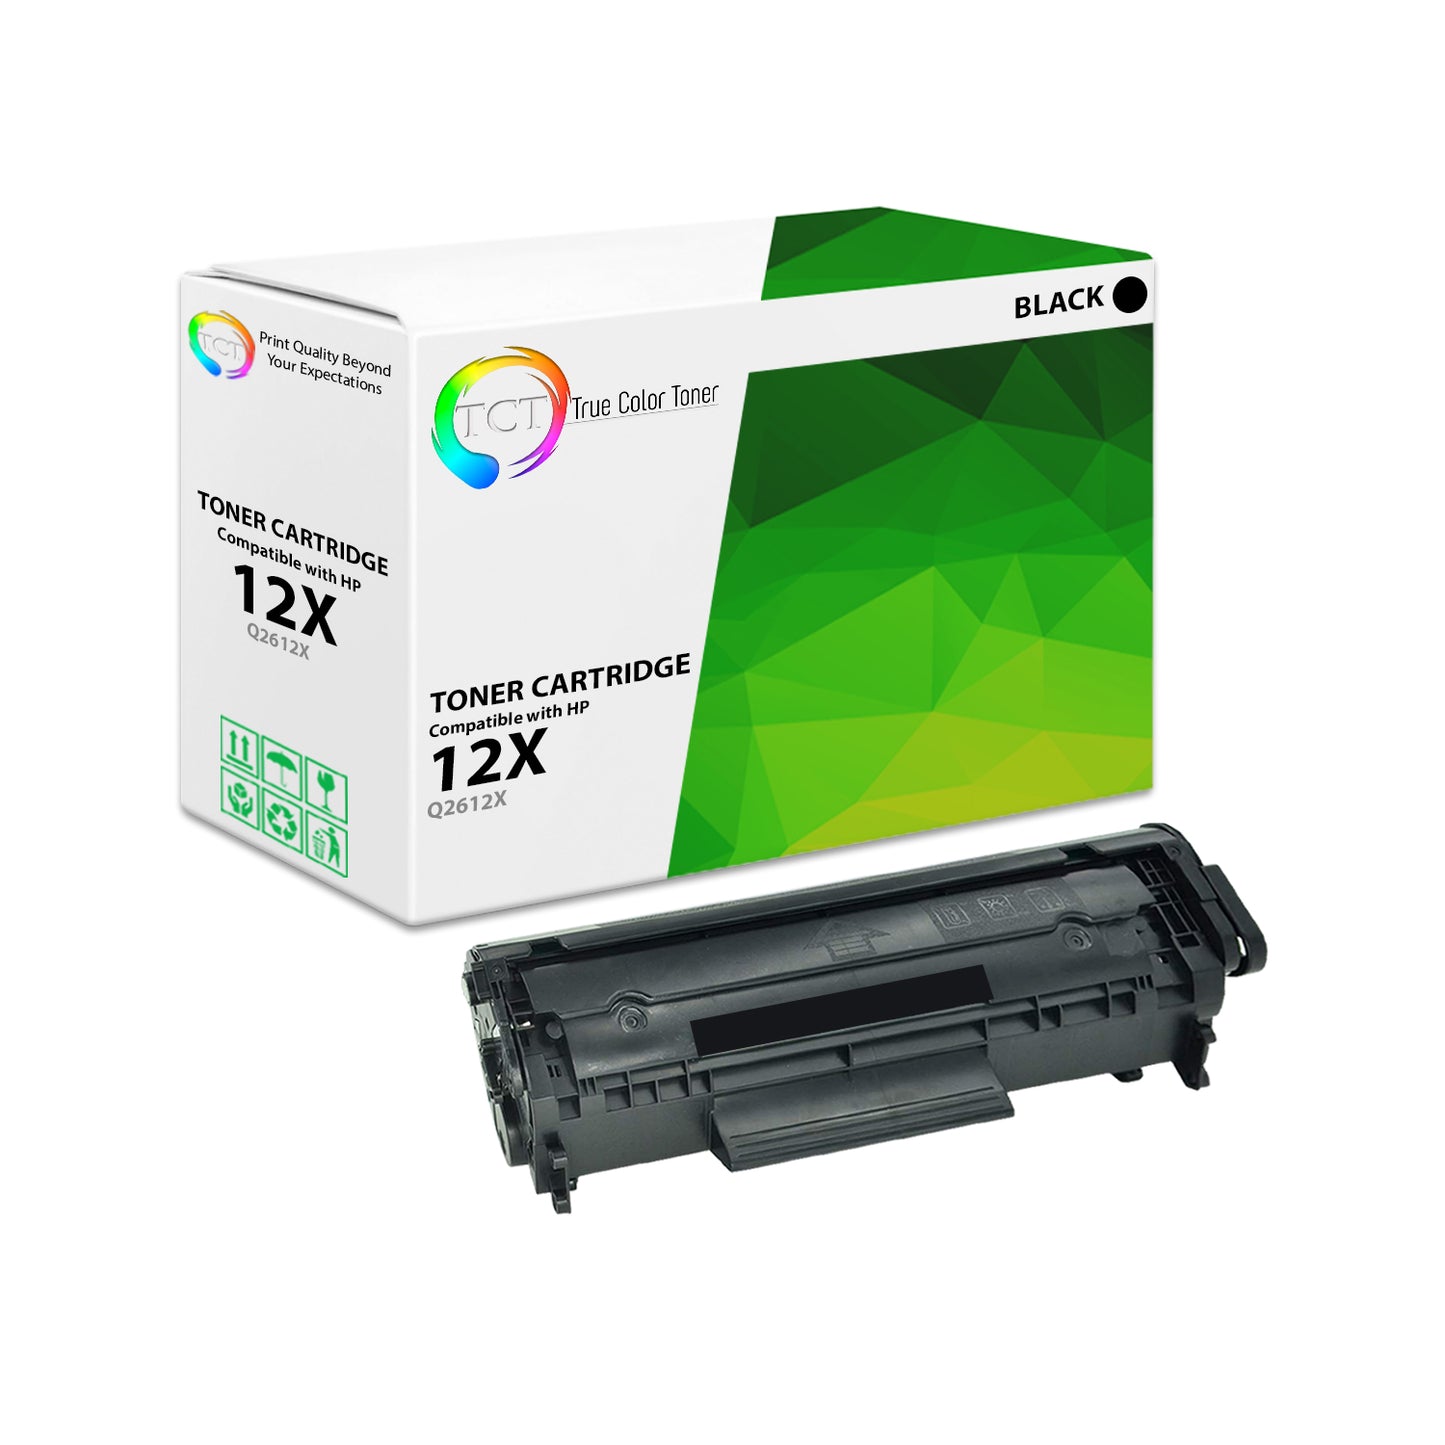 TCT Compatible High Yield Toner Cartridge Replacement for the HP 12X Series - 1 Pack Black